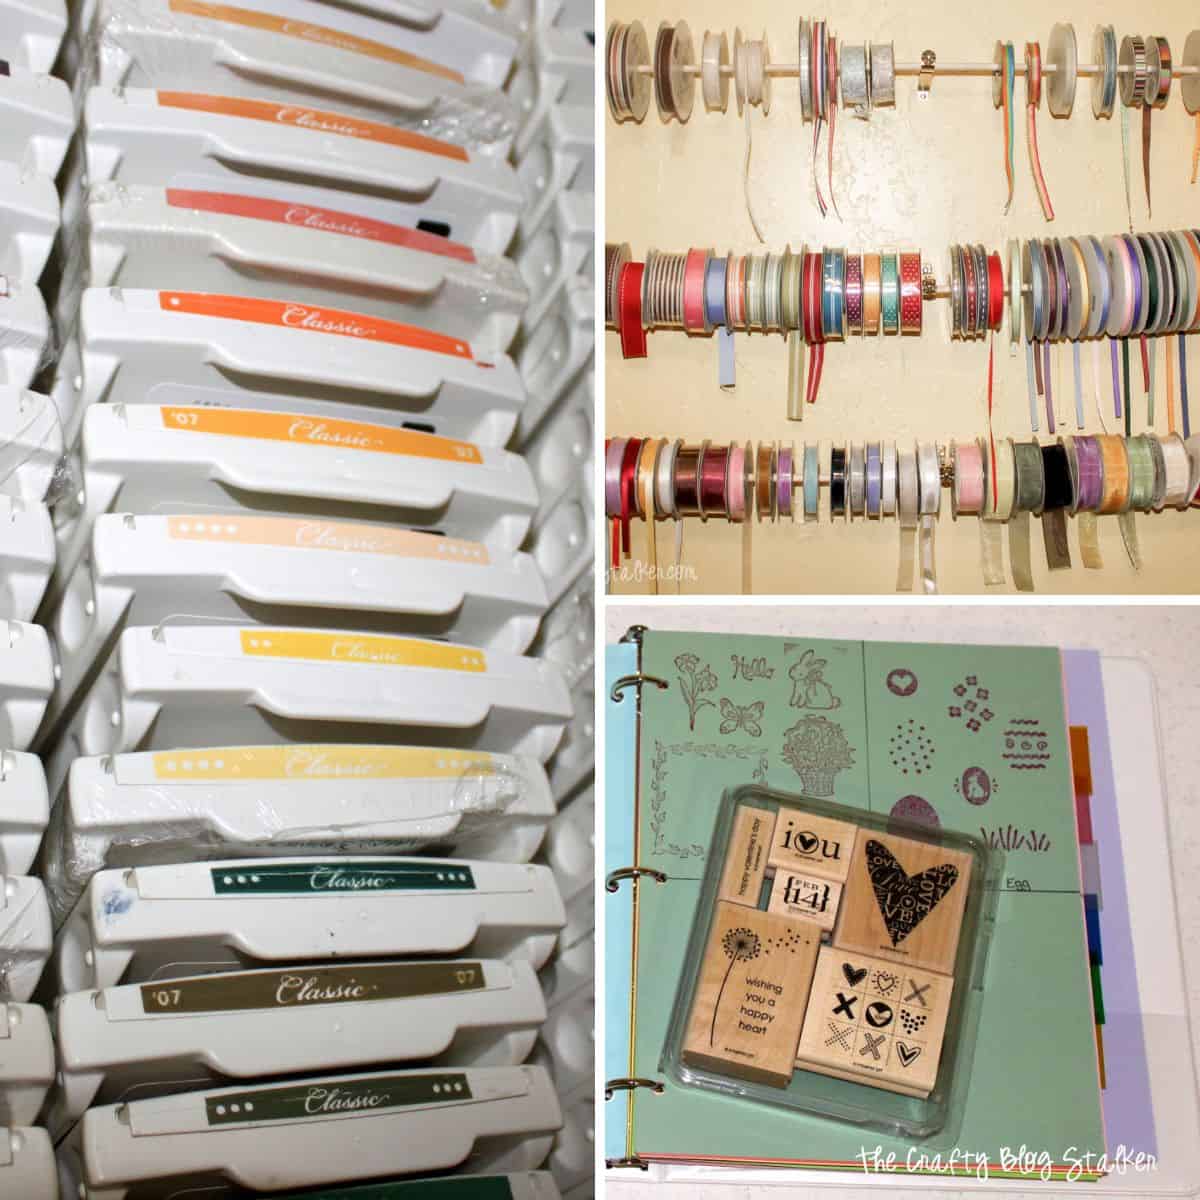 Dream Craft Room Tour and Storage Ideas - Michelle's Party Plan-It